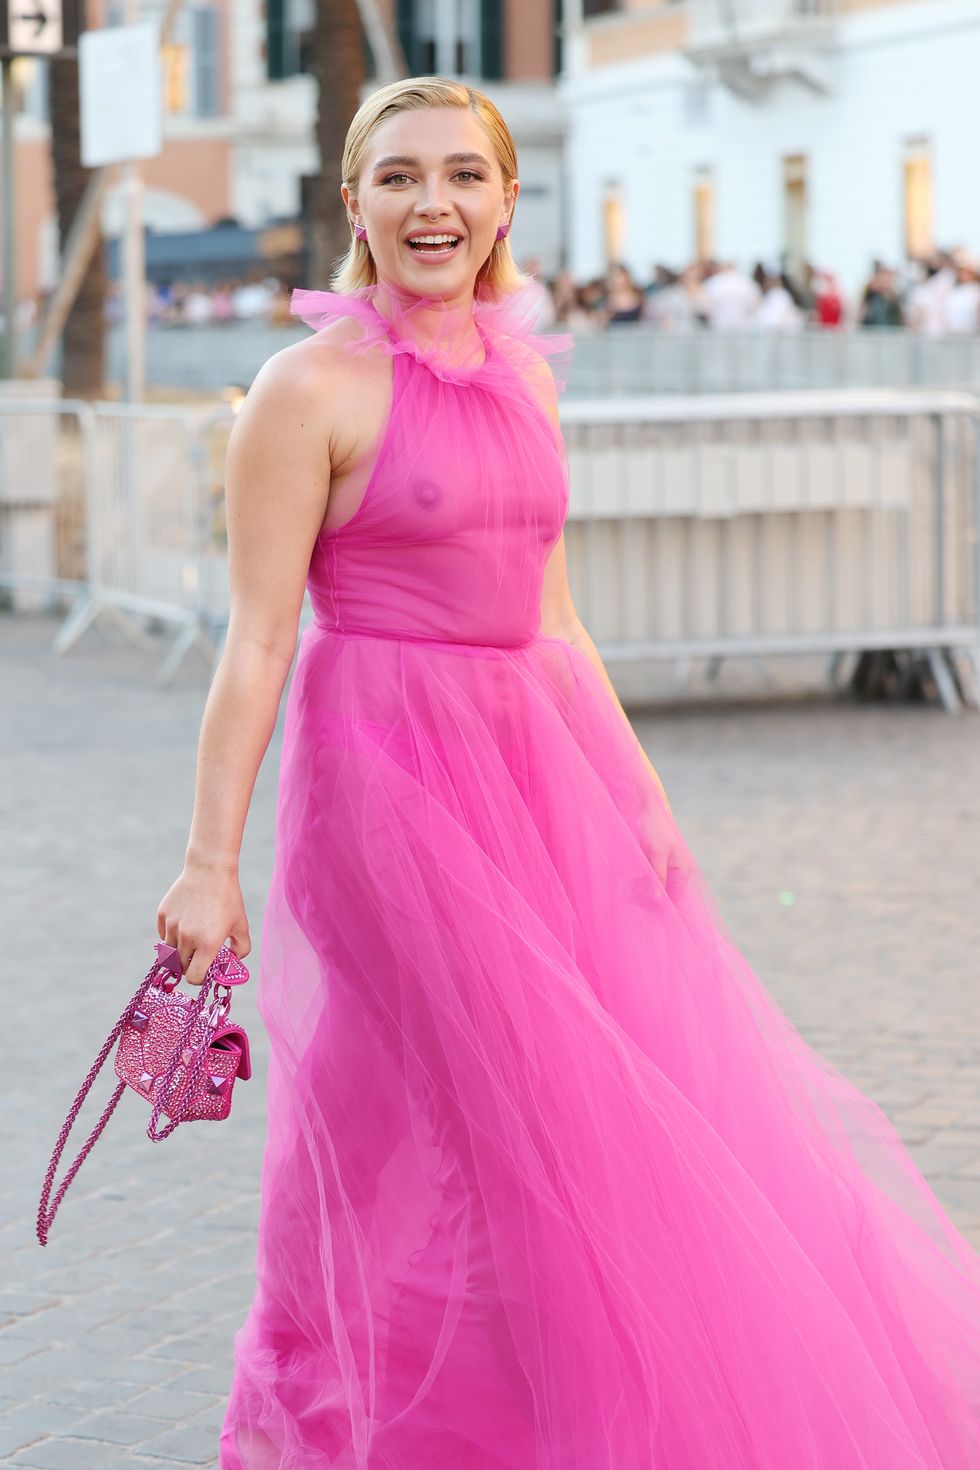 florence pugh in the pink sheer dress